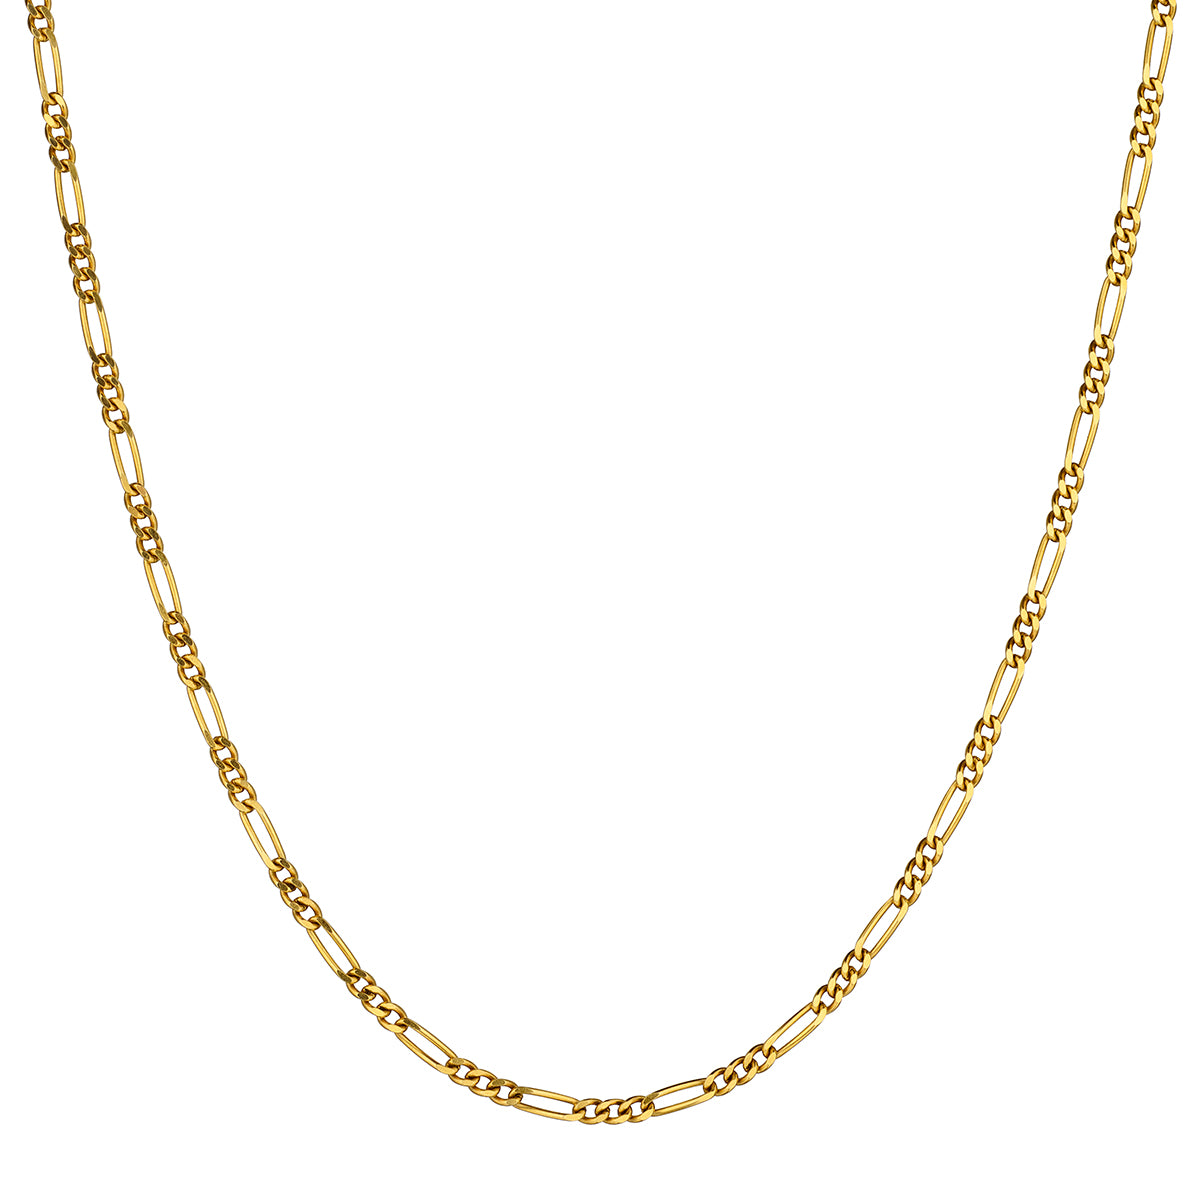 14kt Yellow Gold Figaro Chain. 24" in Length. Weight: 18.9Grams.  Made in Italy